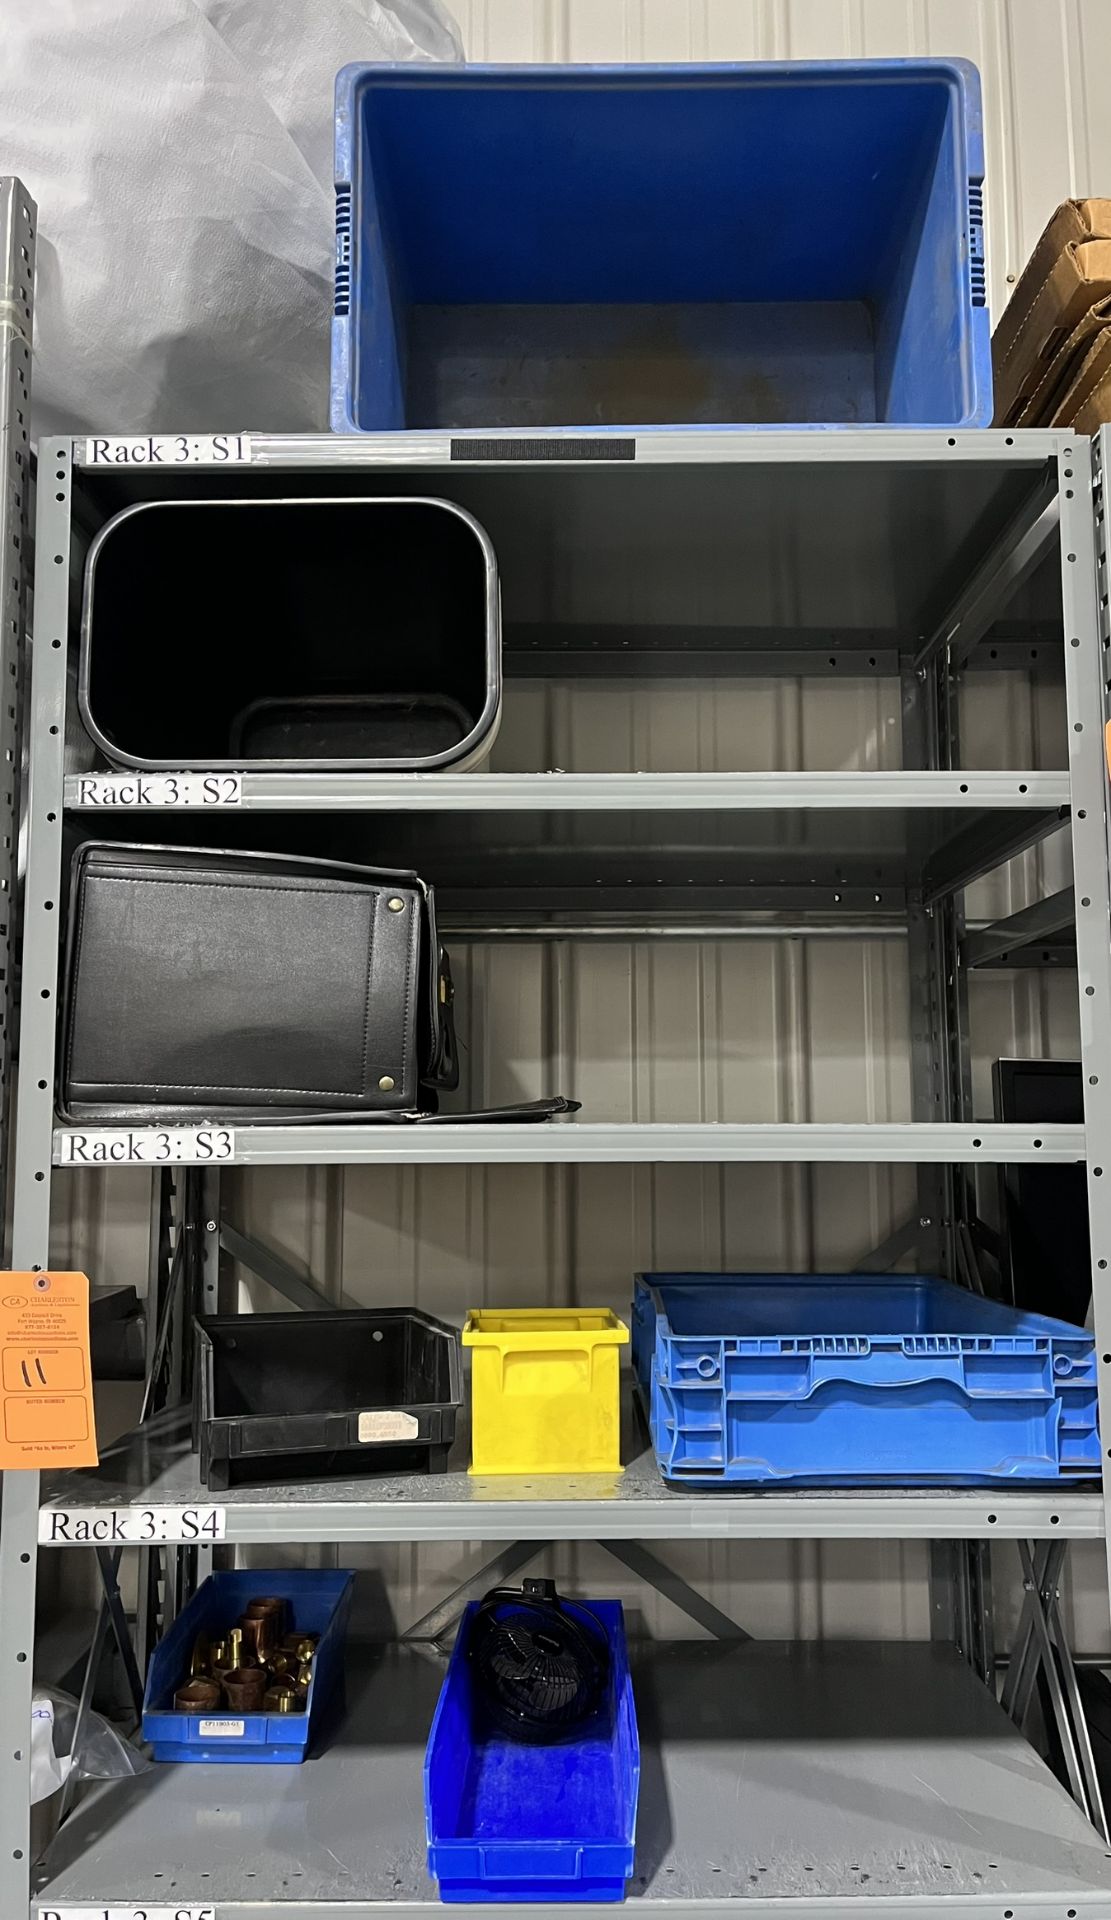 CONTENTS OF RACK (ZONES A&B1)